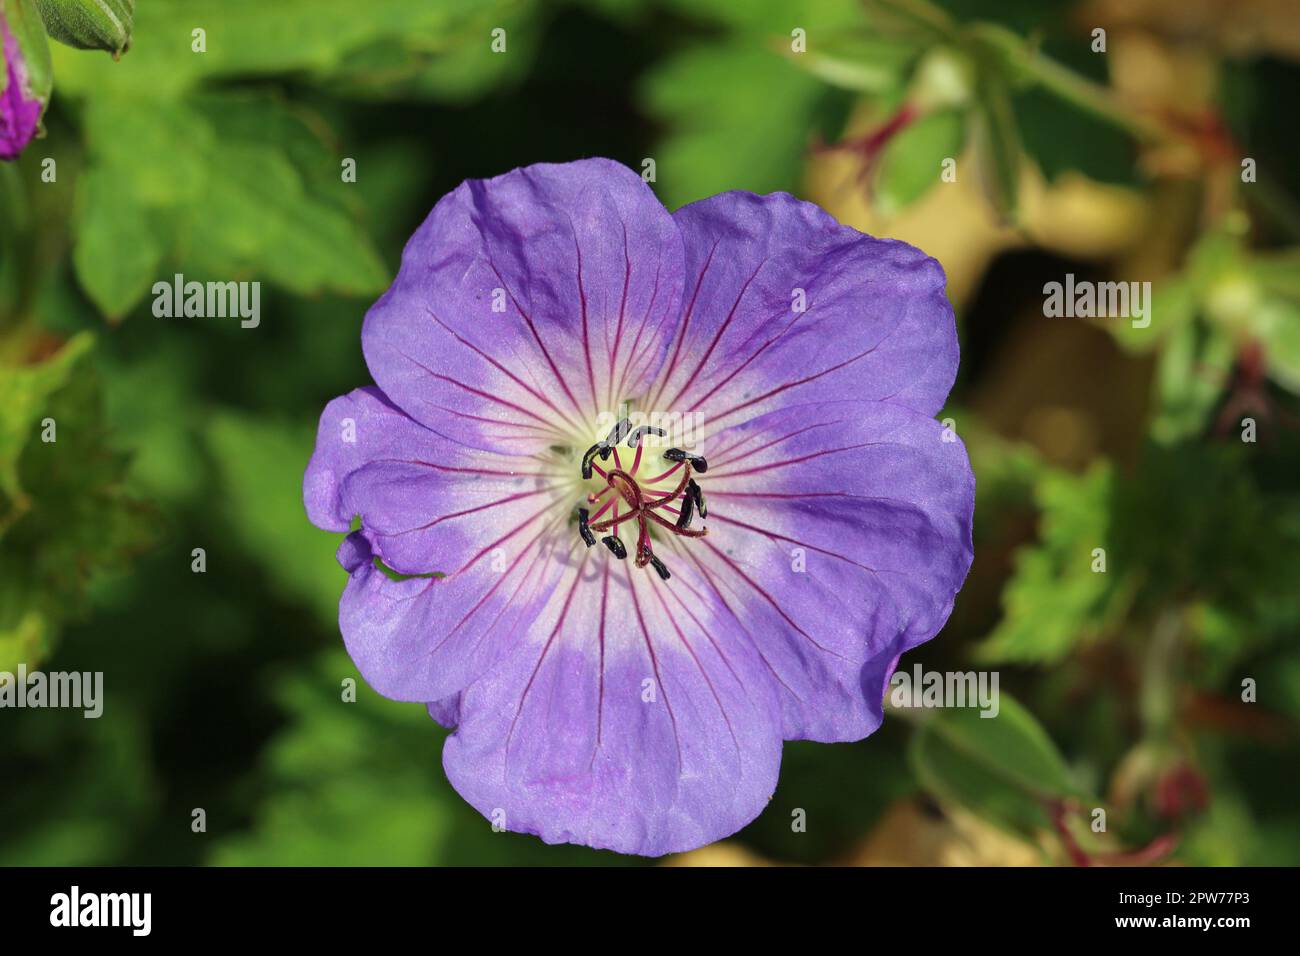 Purple cranesbill, Geranium unknown species and variety, flower with pale centre in close up with a background of blurred leaves. Stock Photo